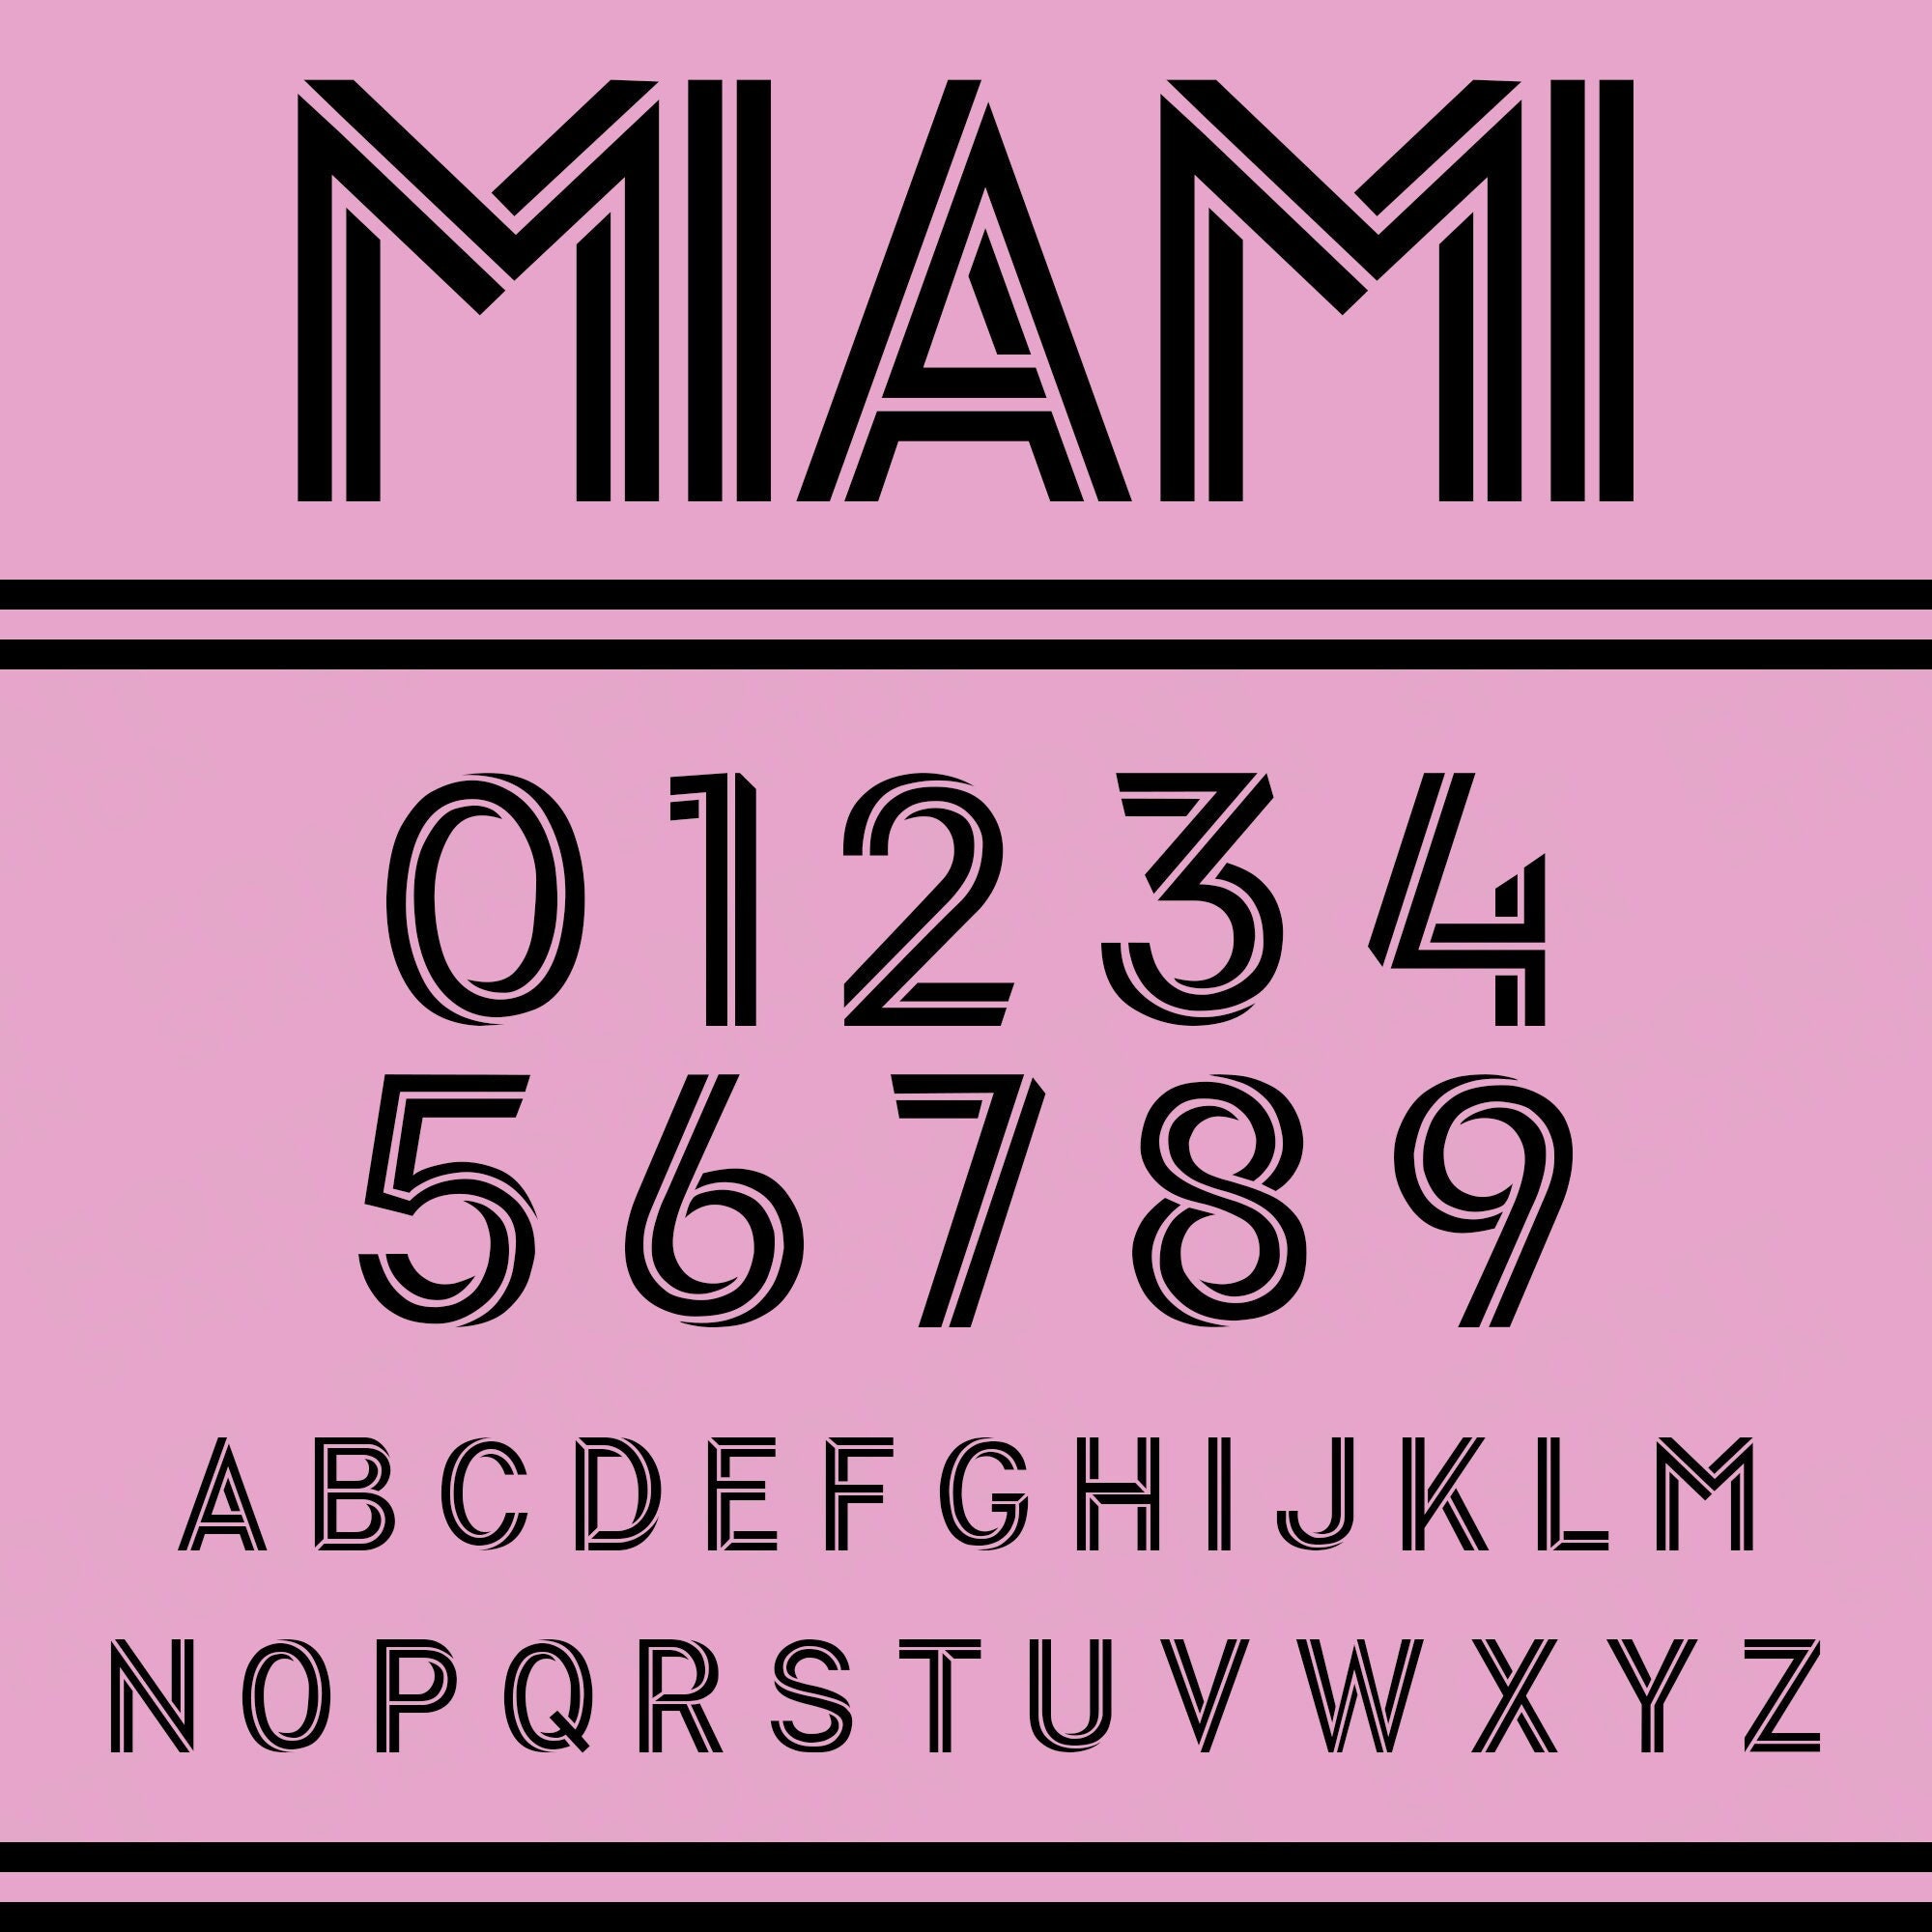 Football Font: Inter Miami 2023-2024 Font in 2023